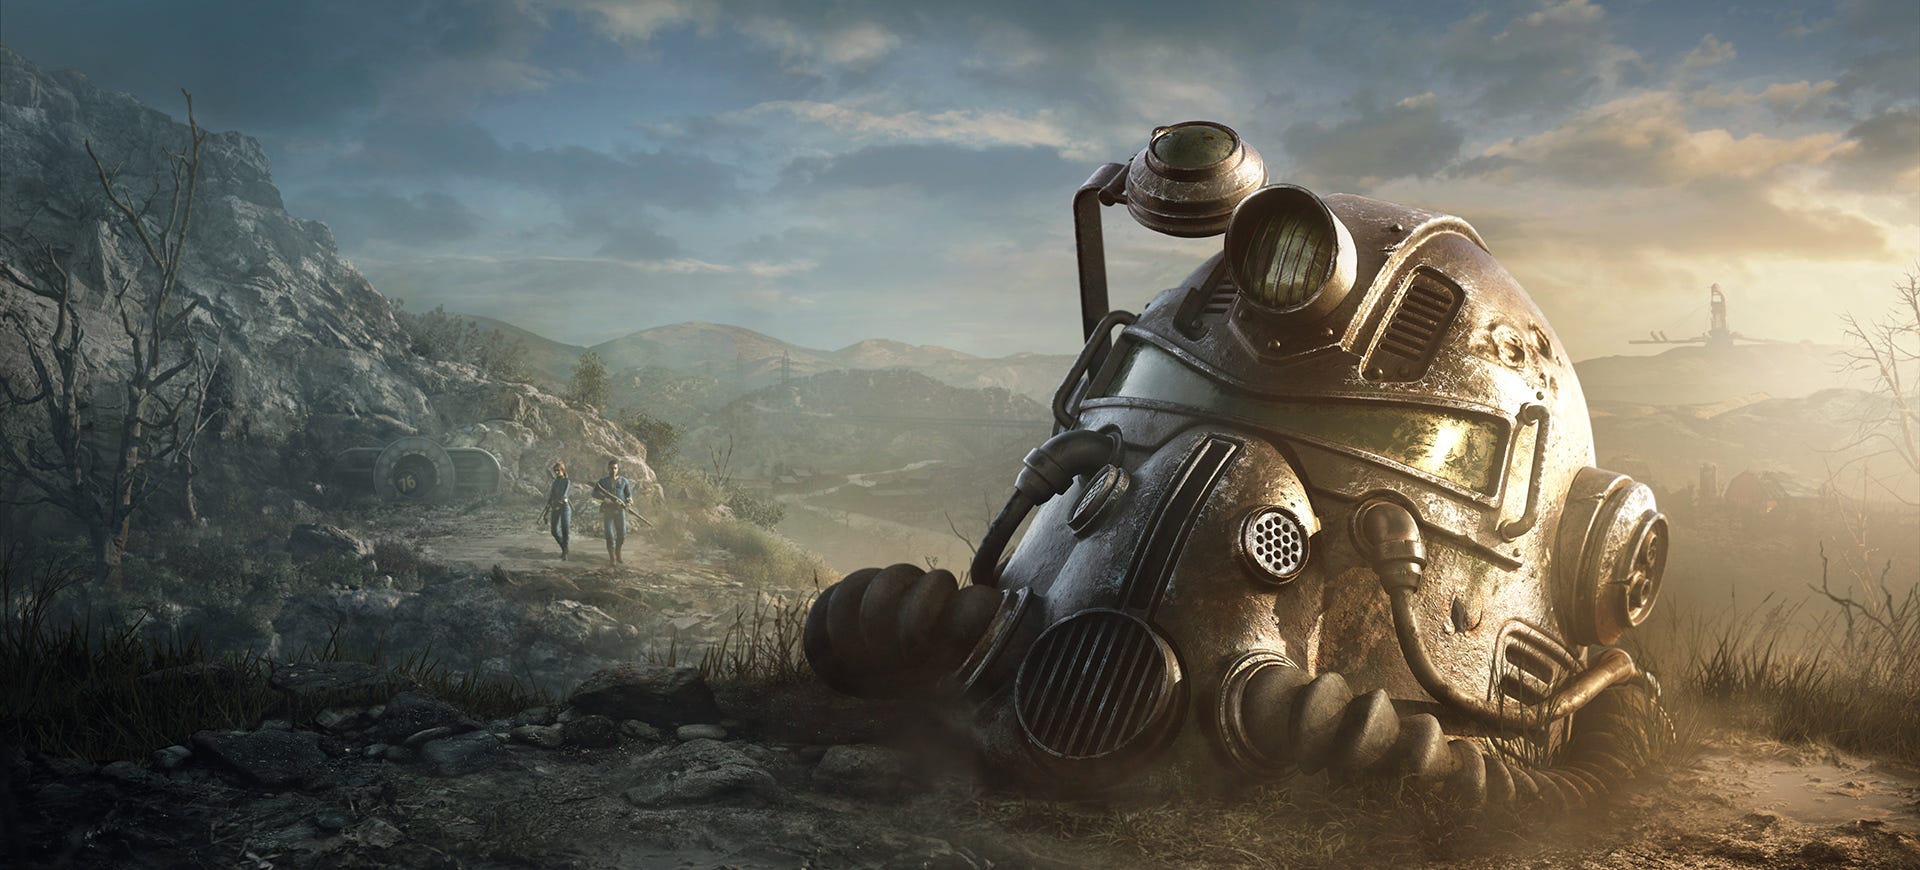 Crawl Out Through the ‘Fallout’